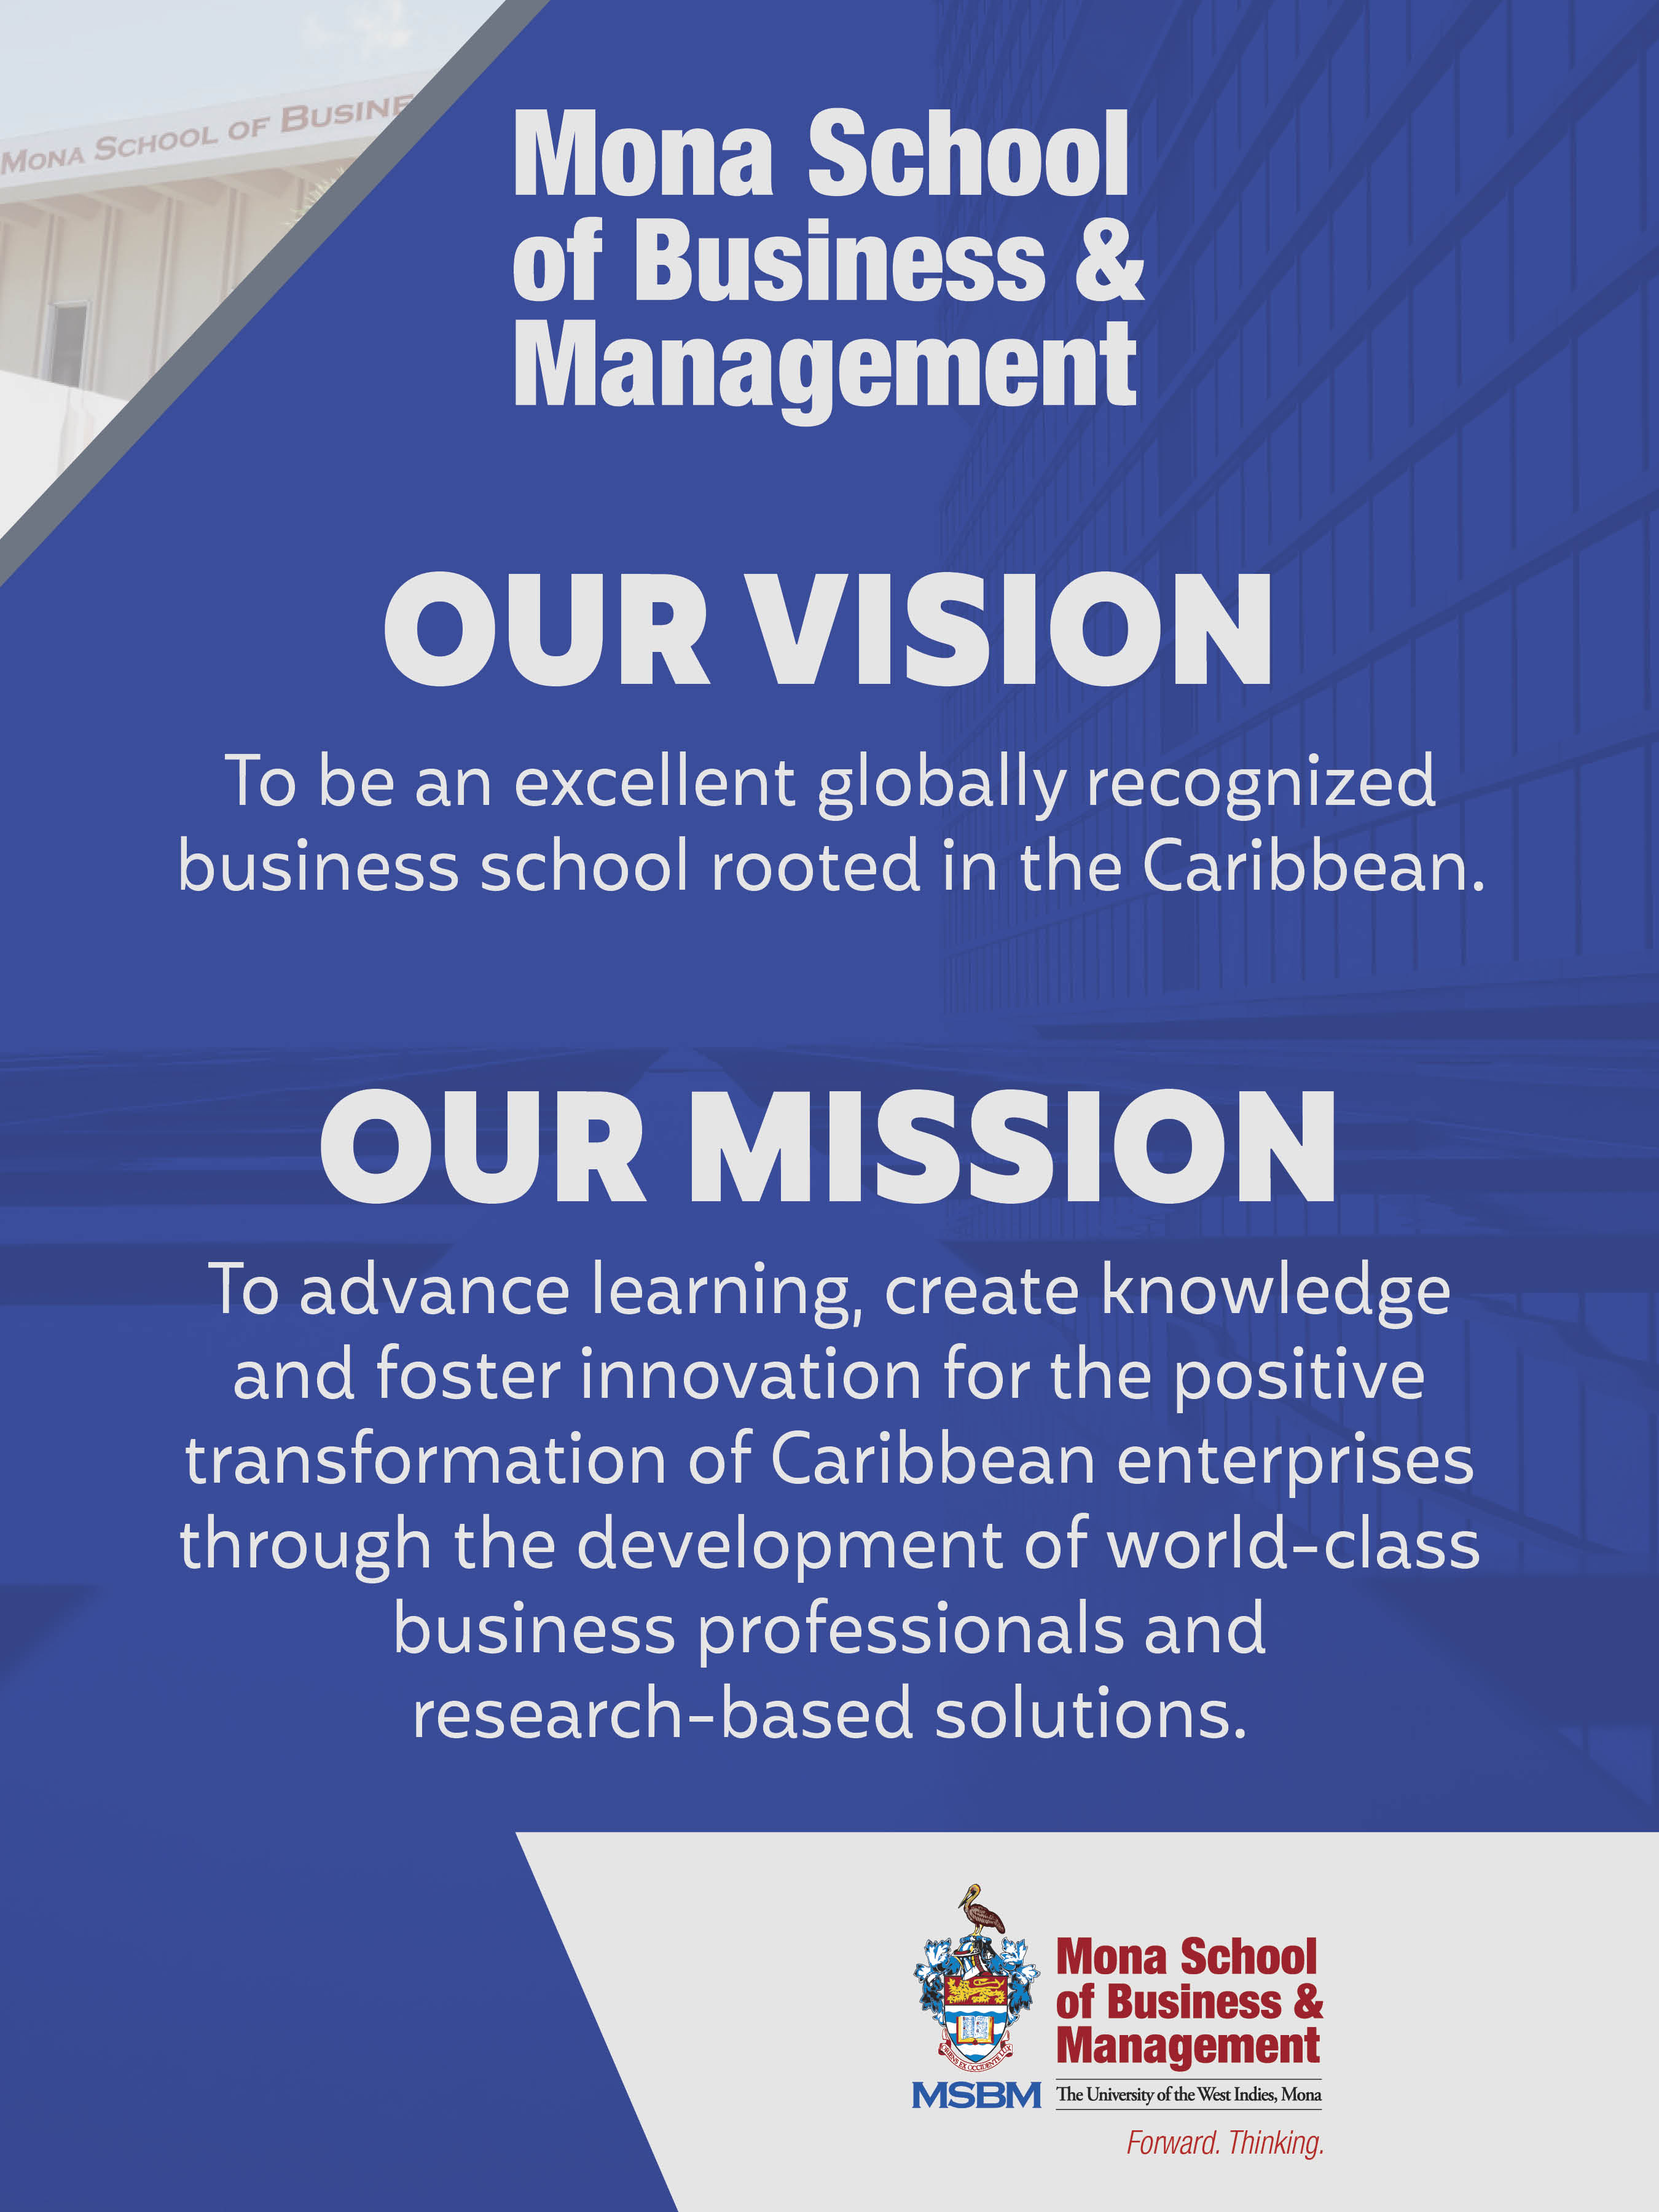 Mission And Vision Mona School Of Business And Management